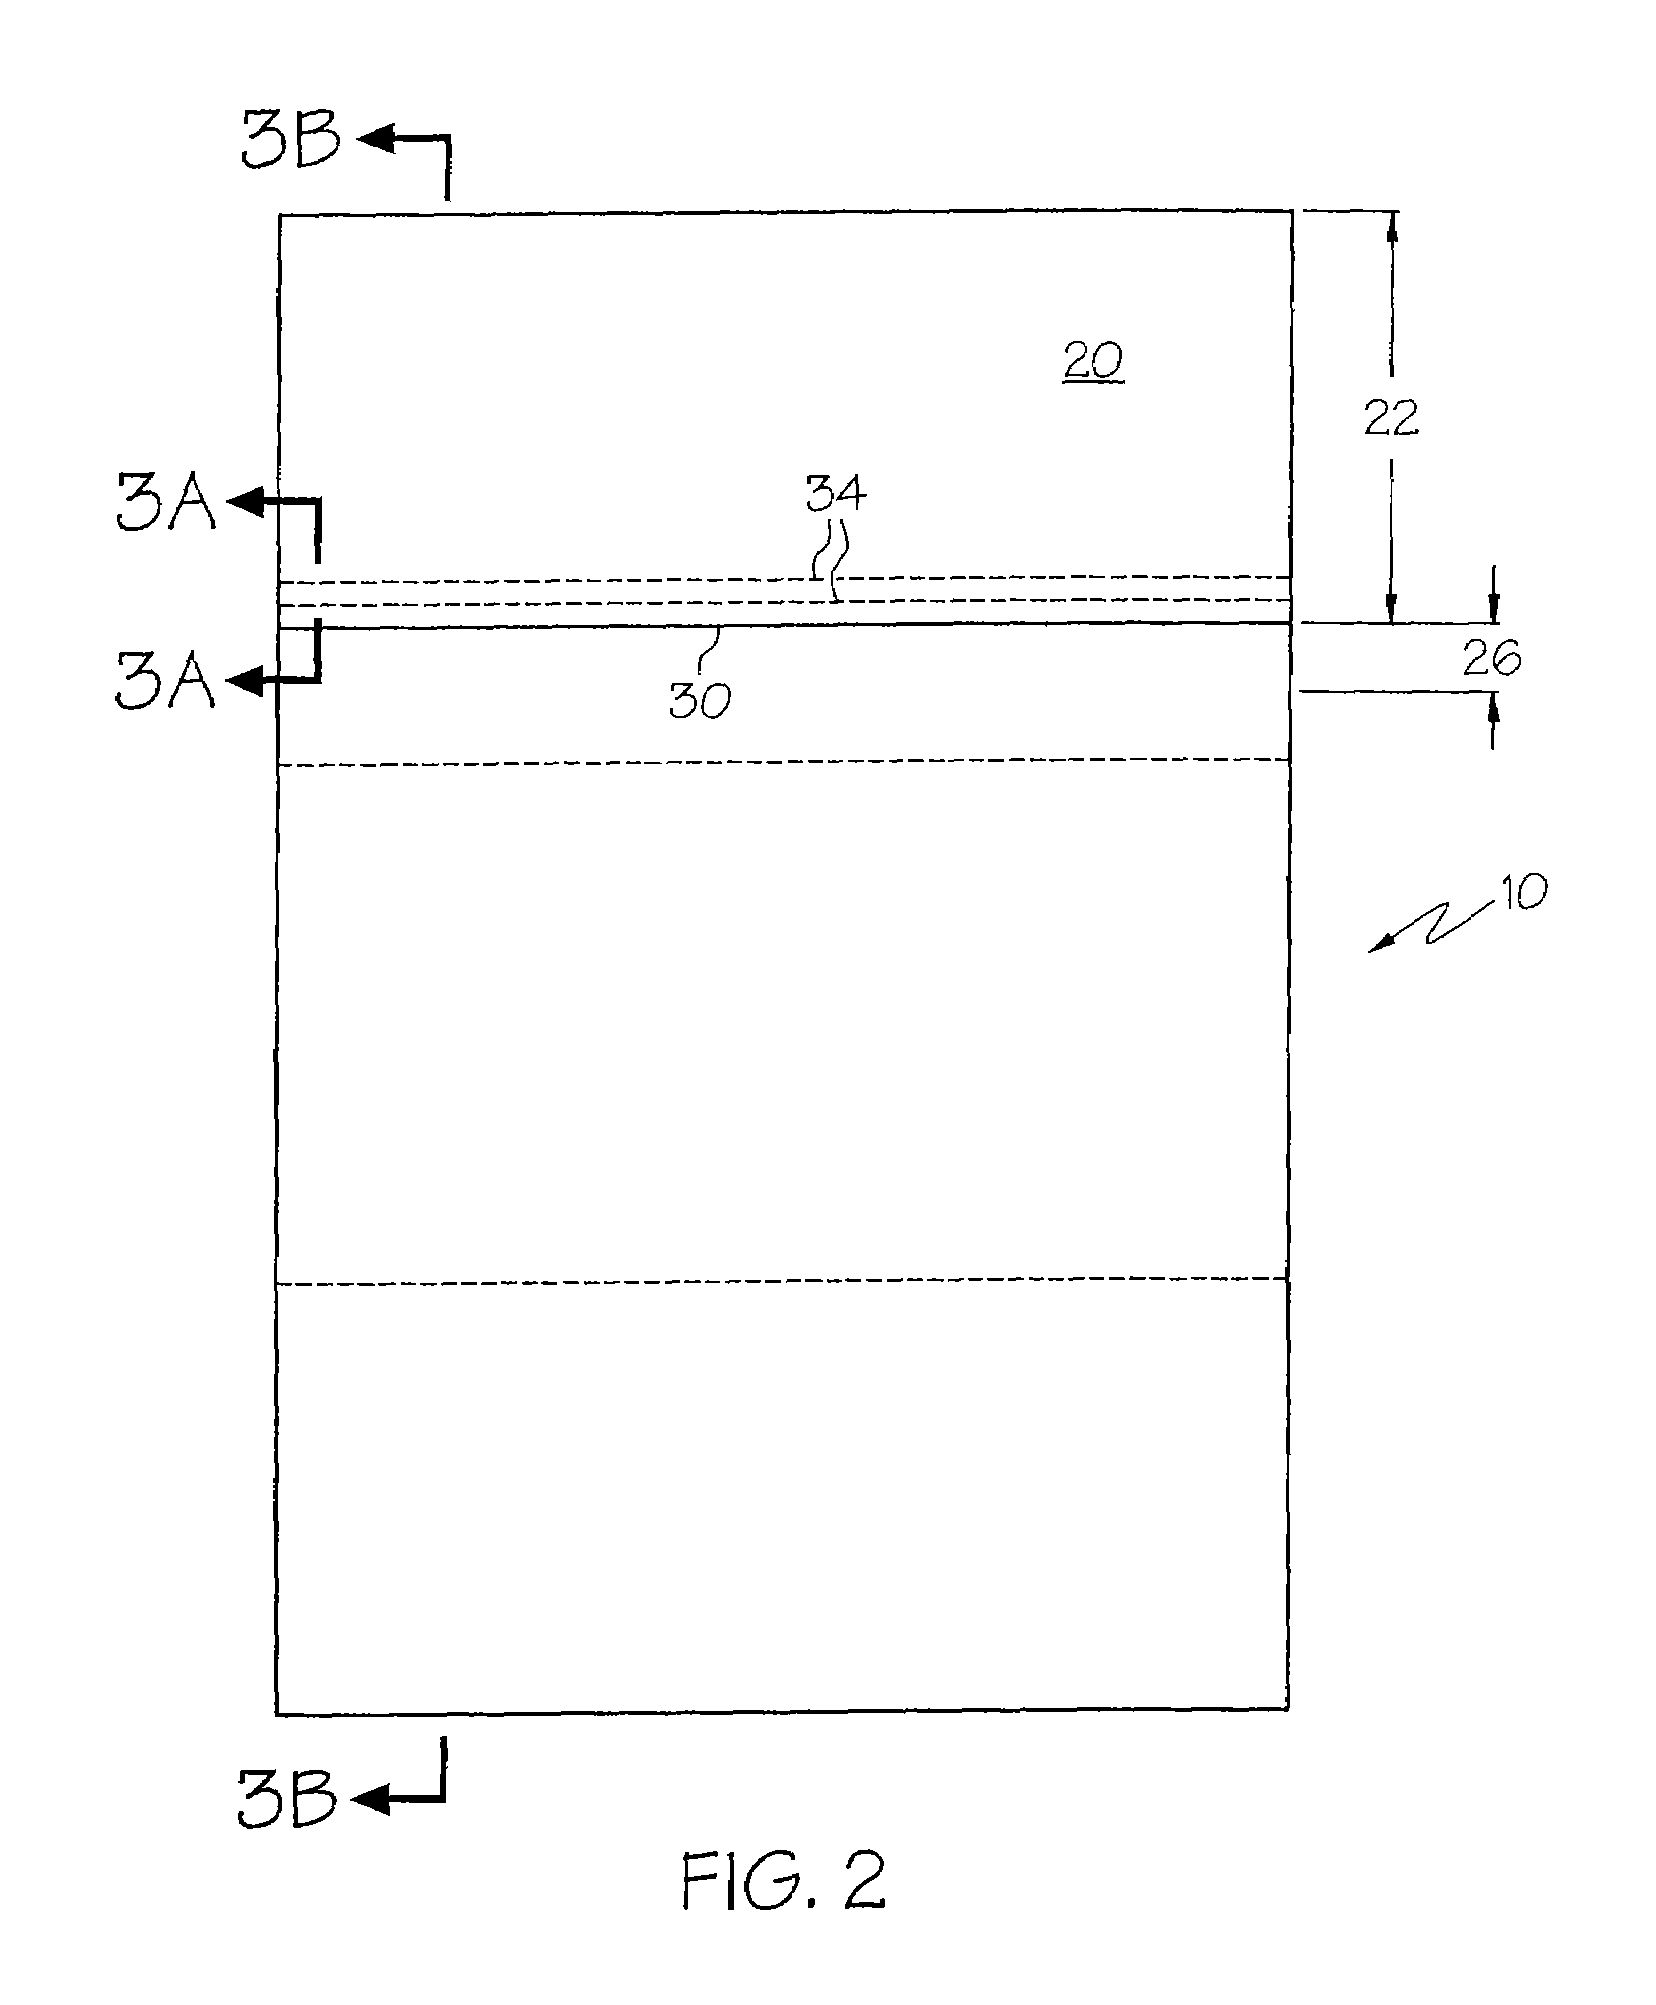 Business form with label stock and message bearing stock